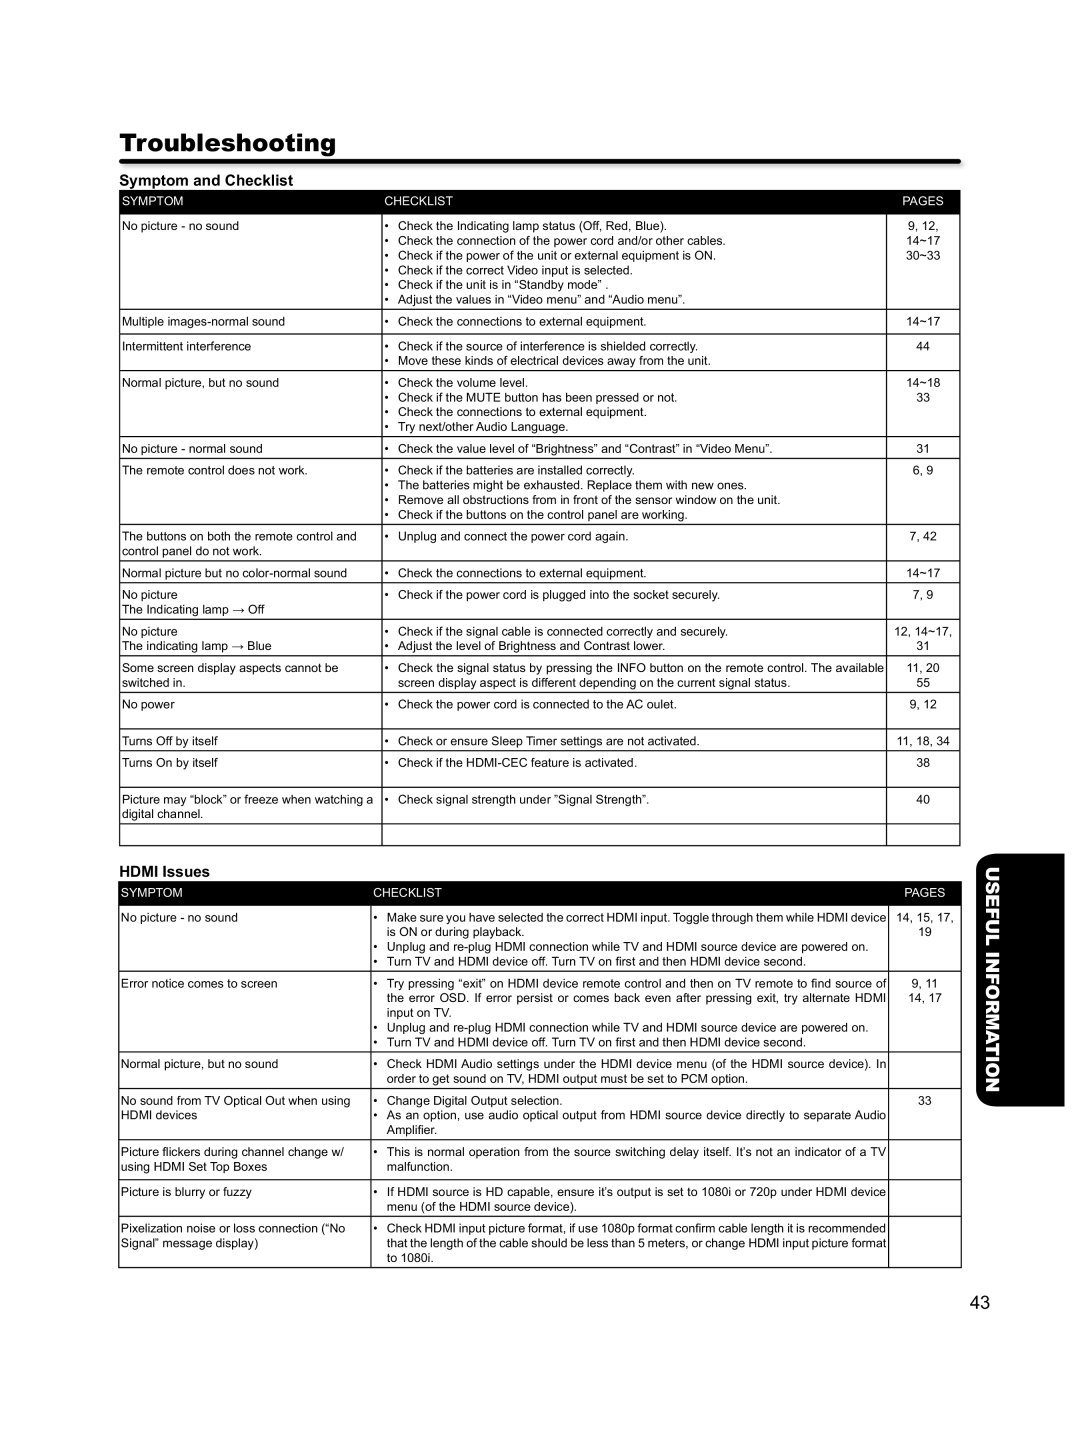 Hitachi L46S603 Troubleshooting, Useful Information, Symptom and Checklist, HDMI Issues, Pages 